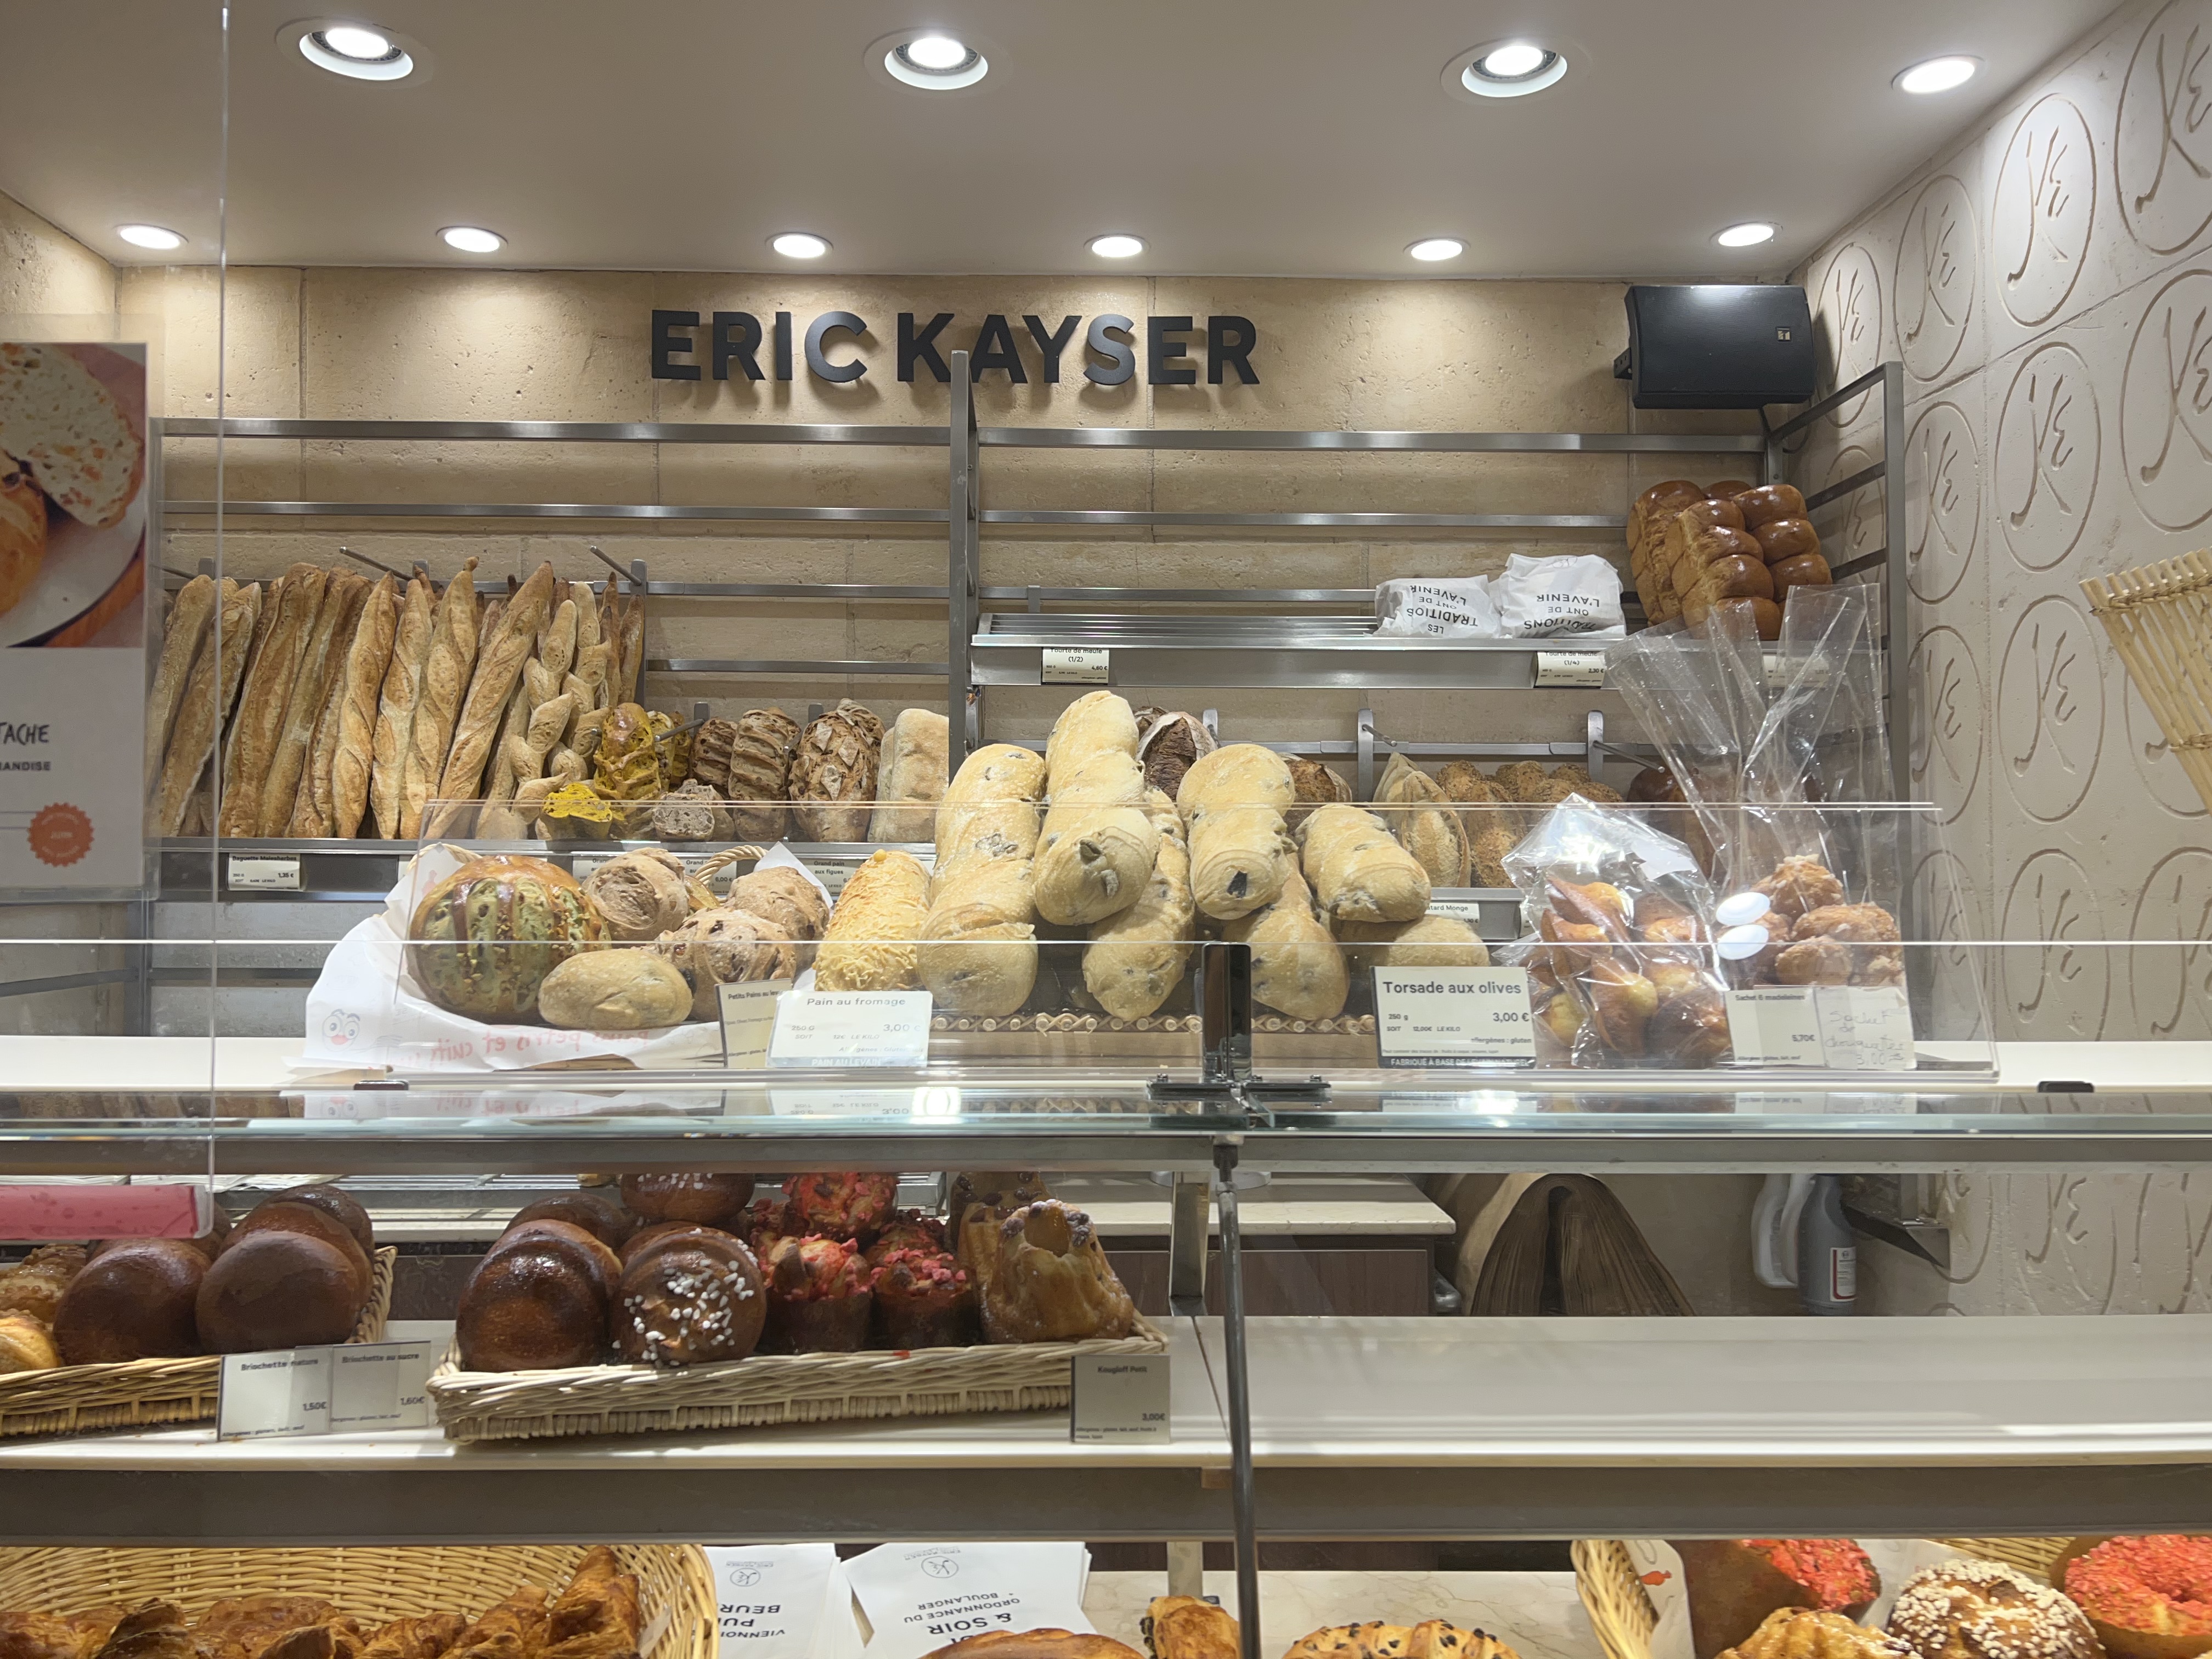 French Bakery_Boulangerie and Patisserie in Paris_Cakes and Tarts_What to Eat in Paris_Adrienne Nguyen_Eric Kayser